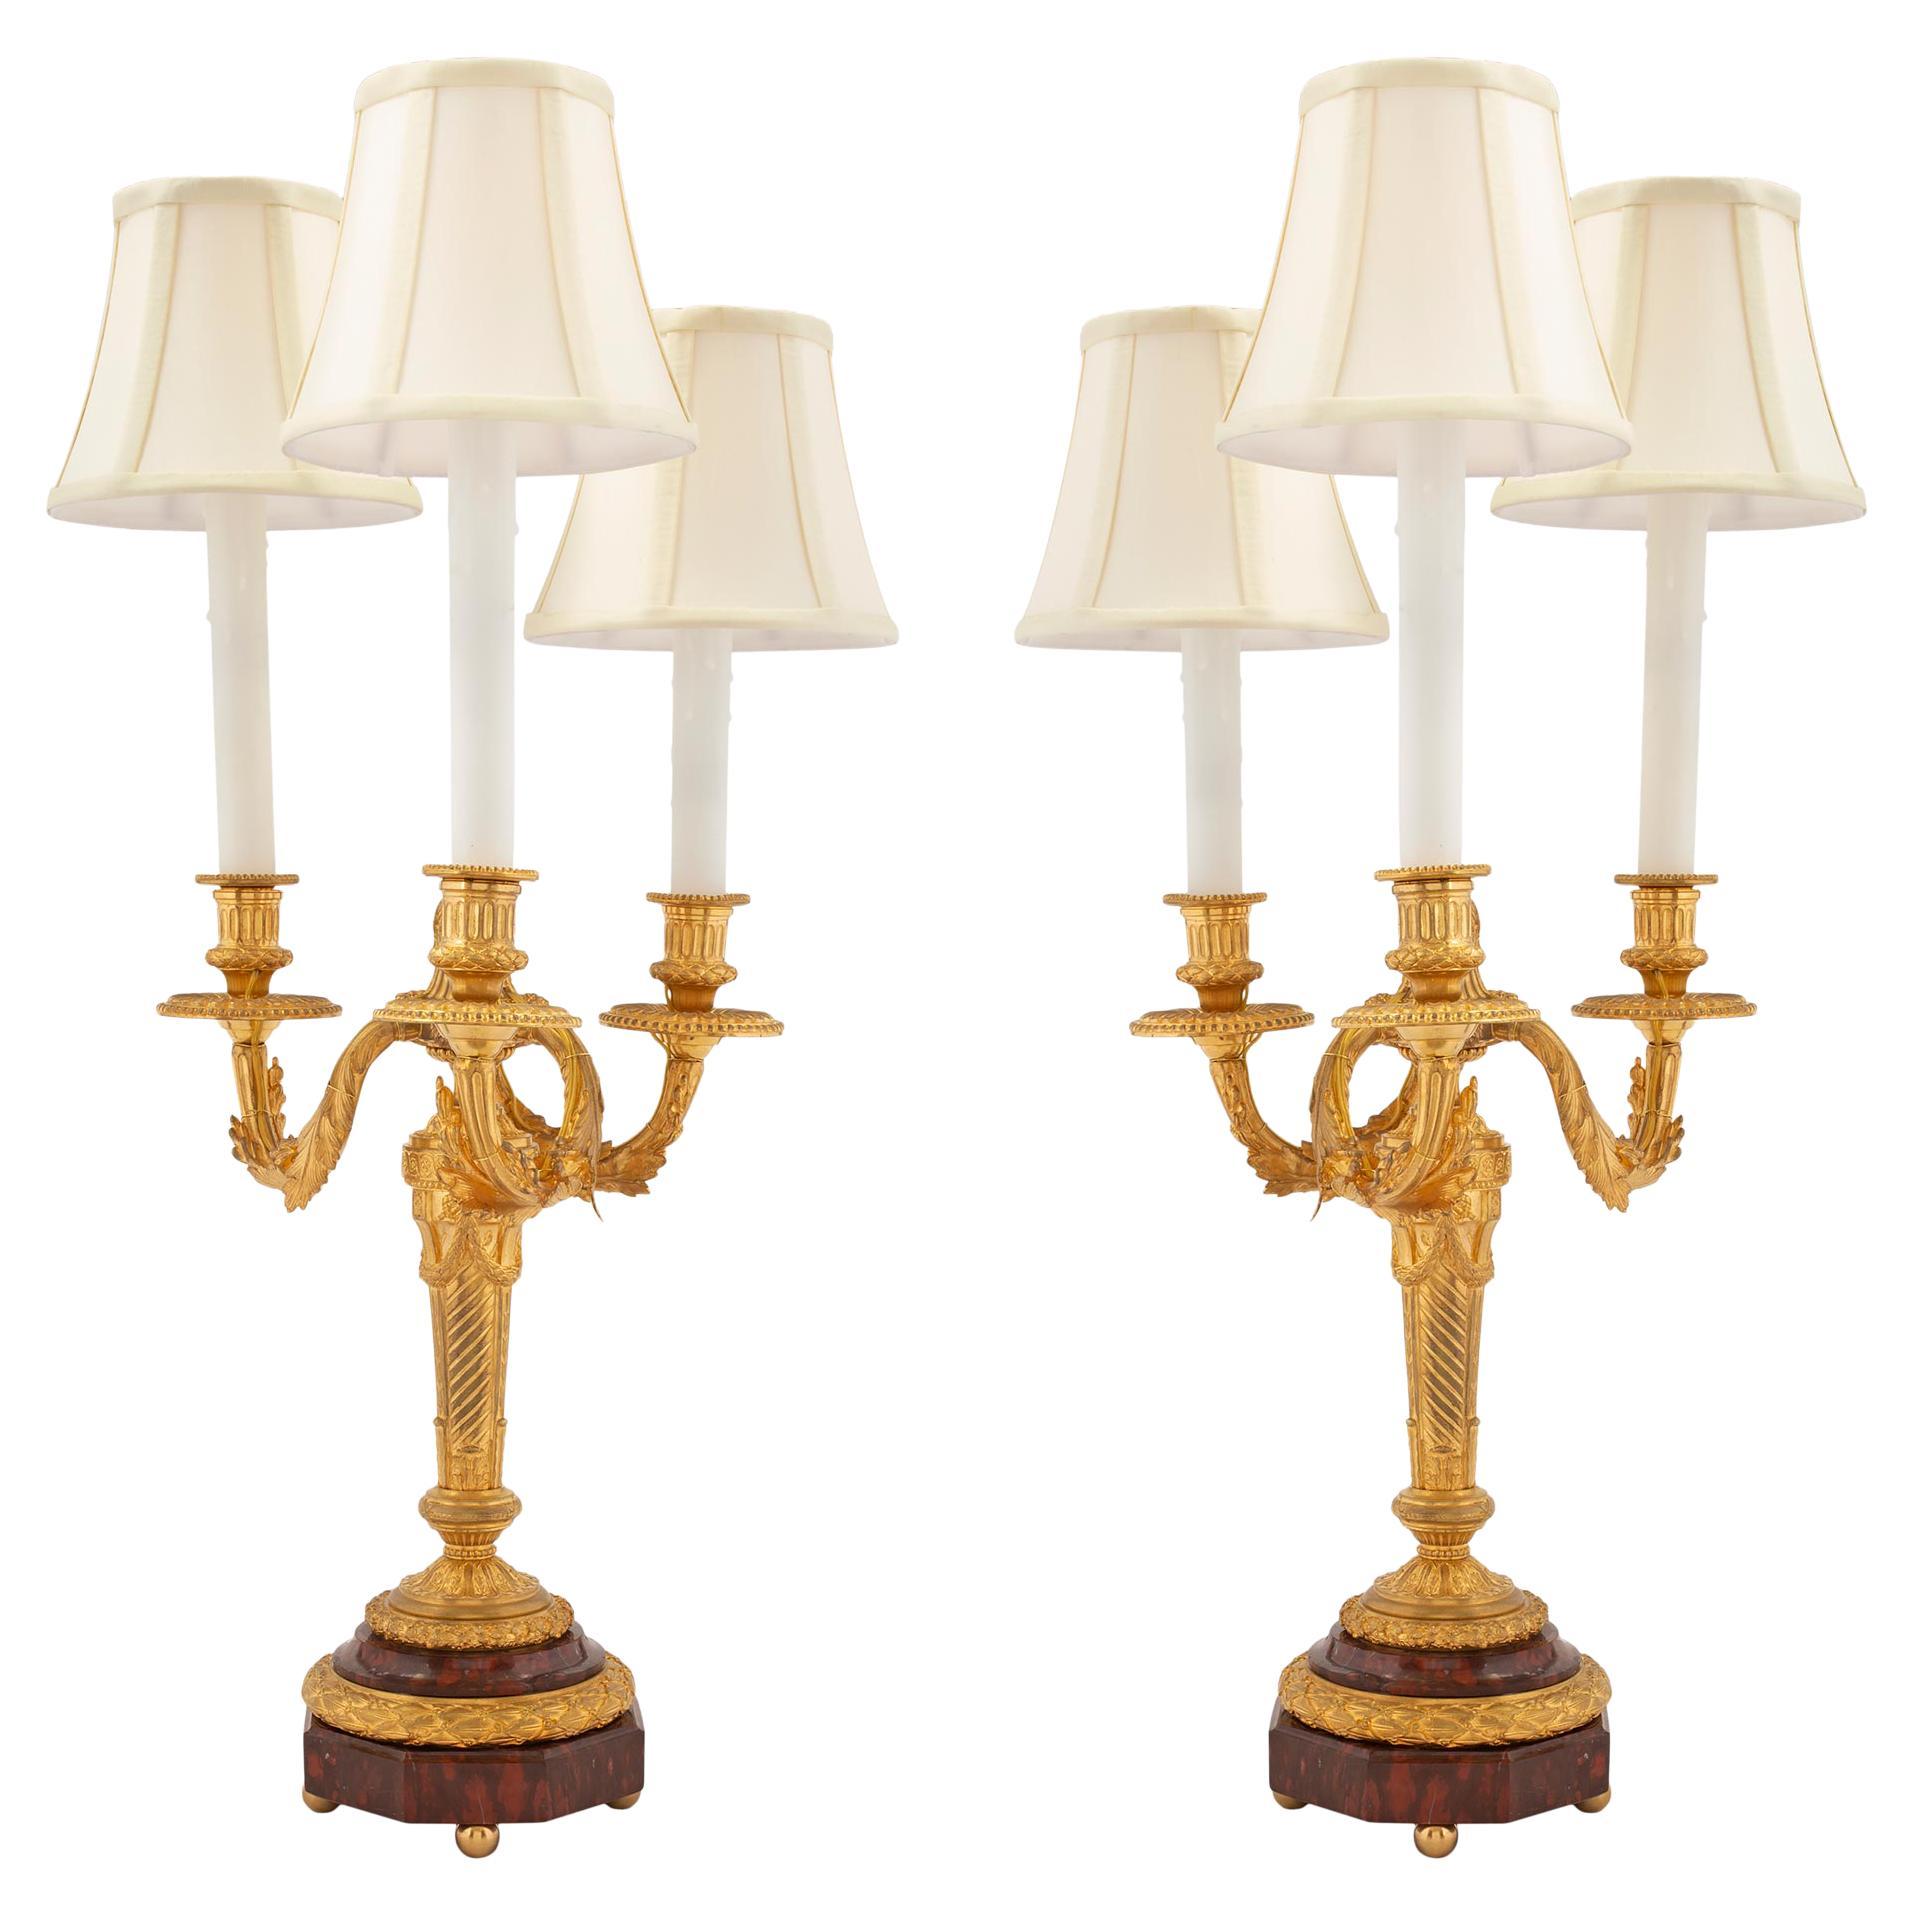 Pair of French 19th Century Louis XVI Style Ormolu and Marble Candelabras Lamps